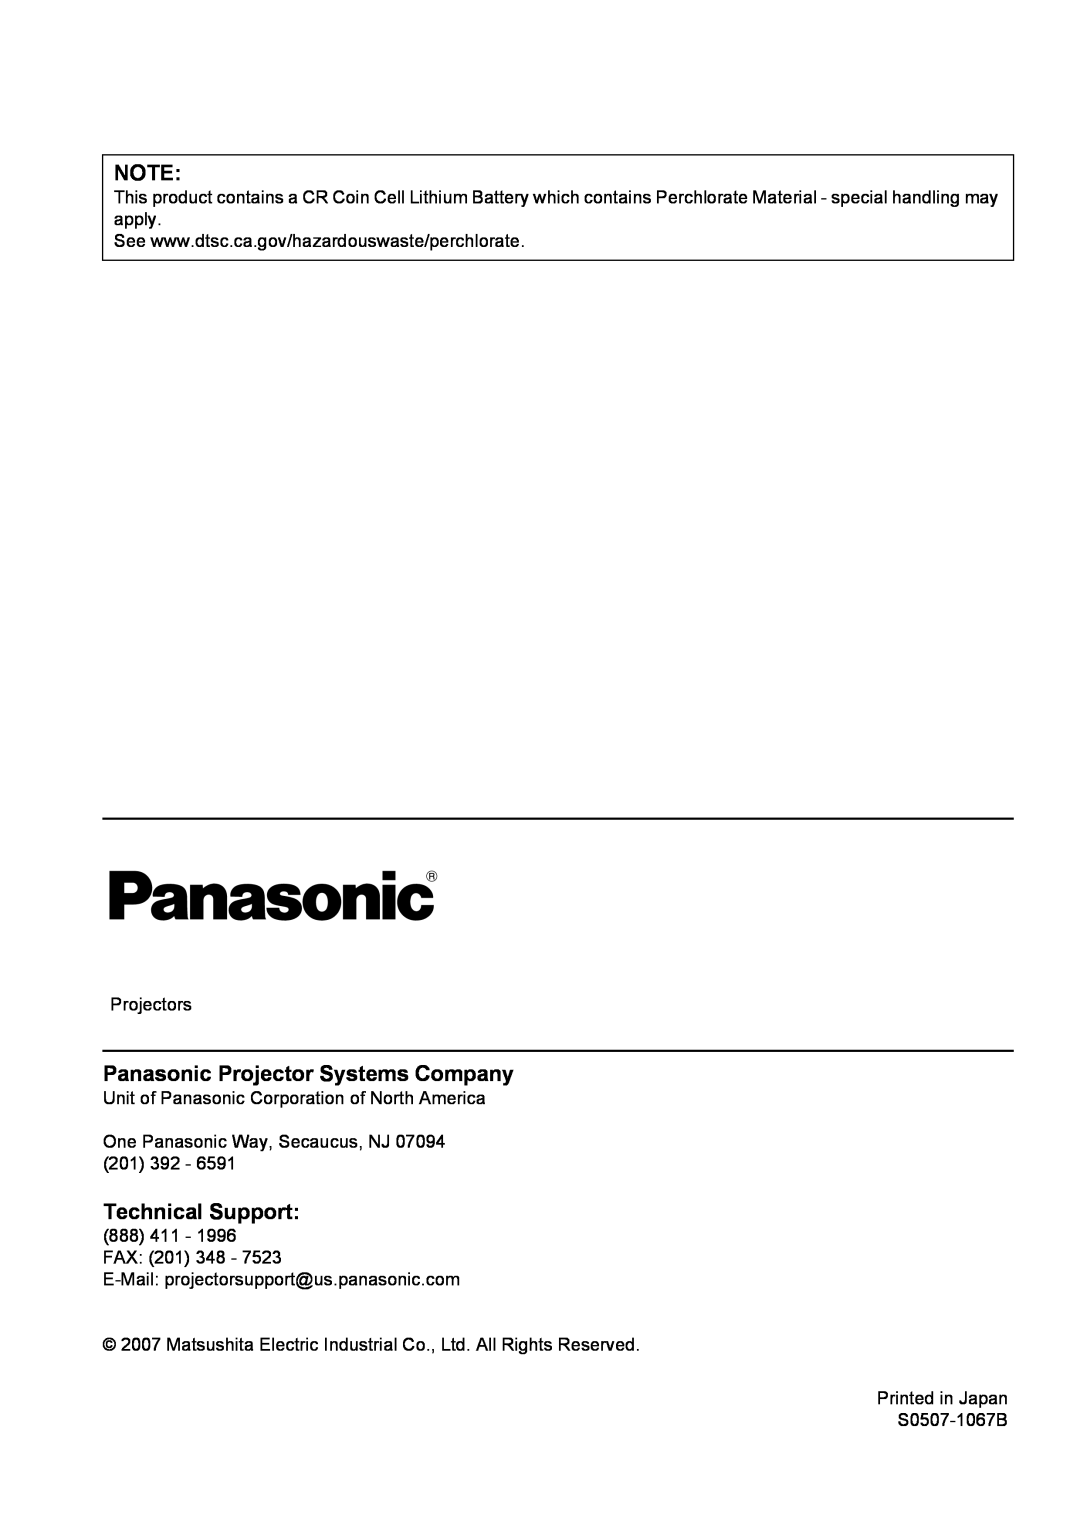 Philips PT-FW100NTU manual Panasonic Projector Systems Company, Technical Support 